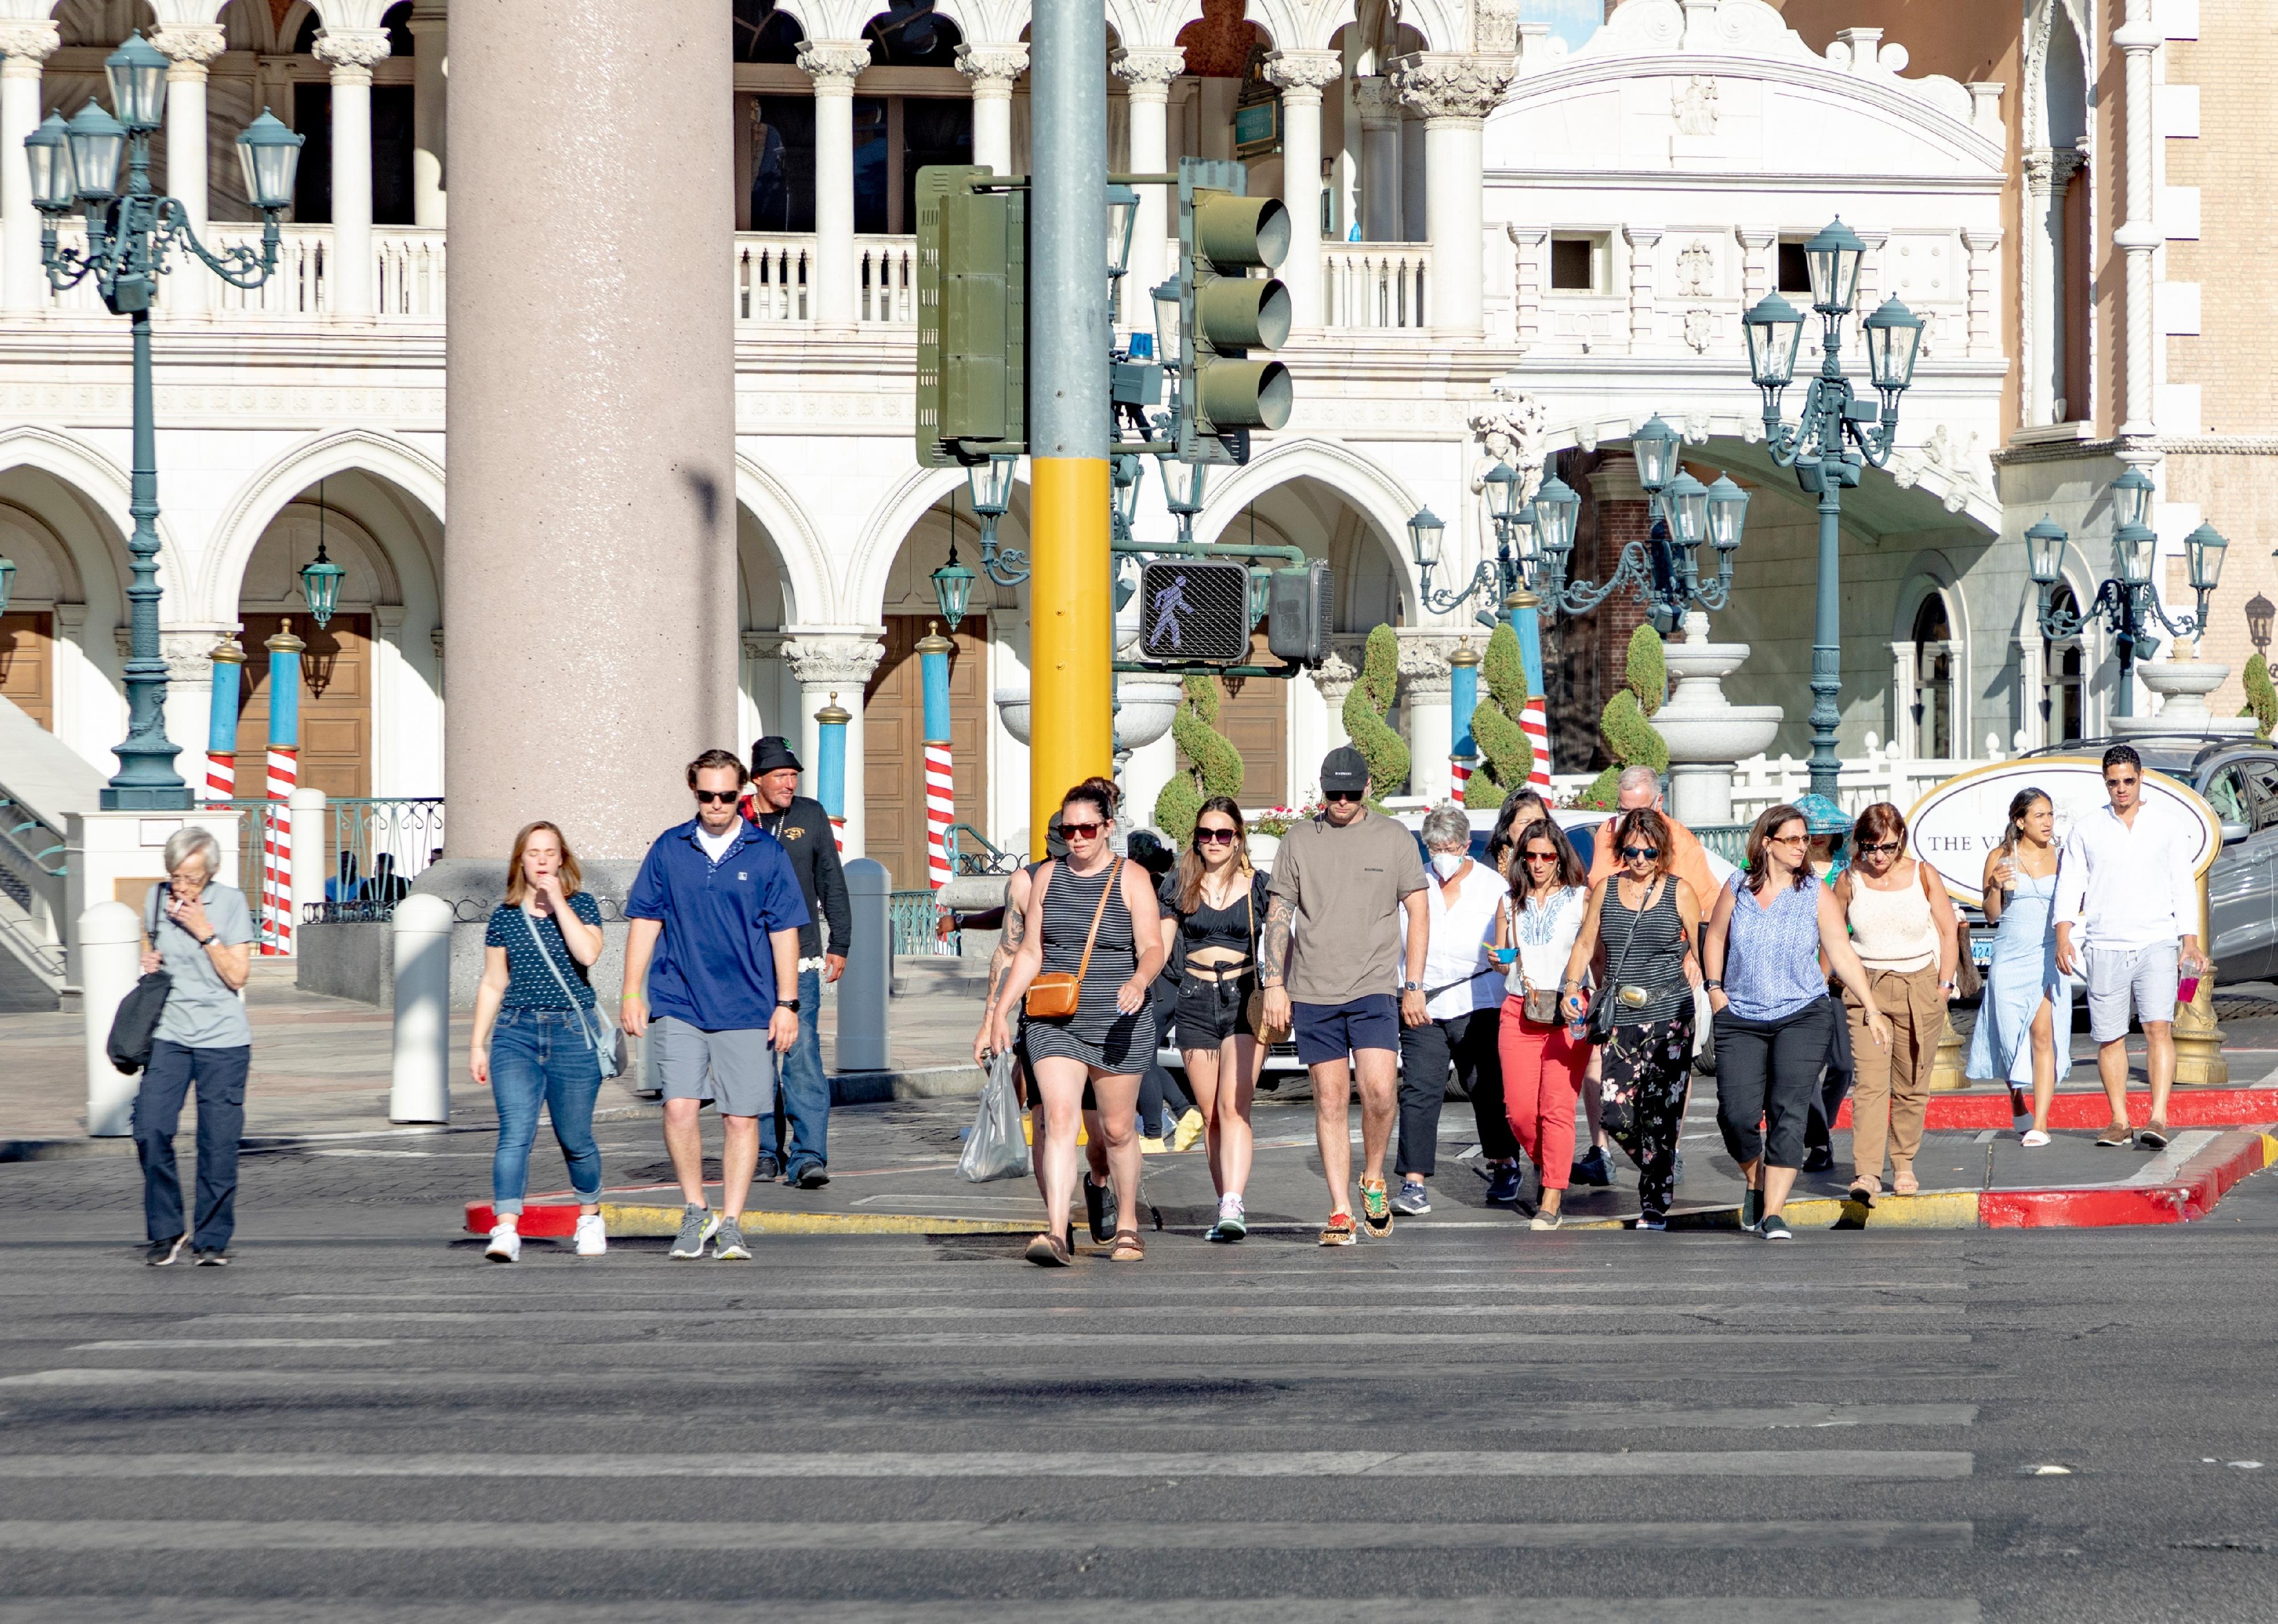 Tourists in Las Vegas crossing the street in daytime at a pedestriam crossing